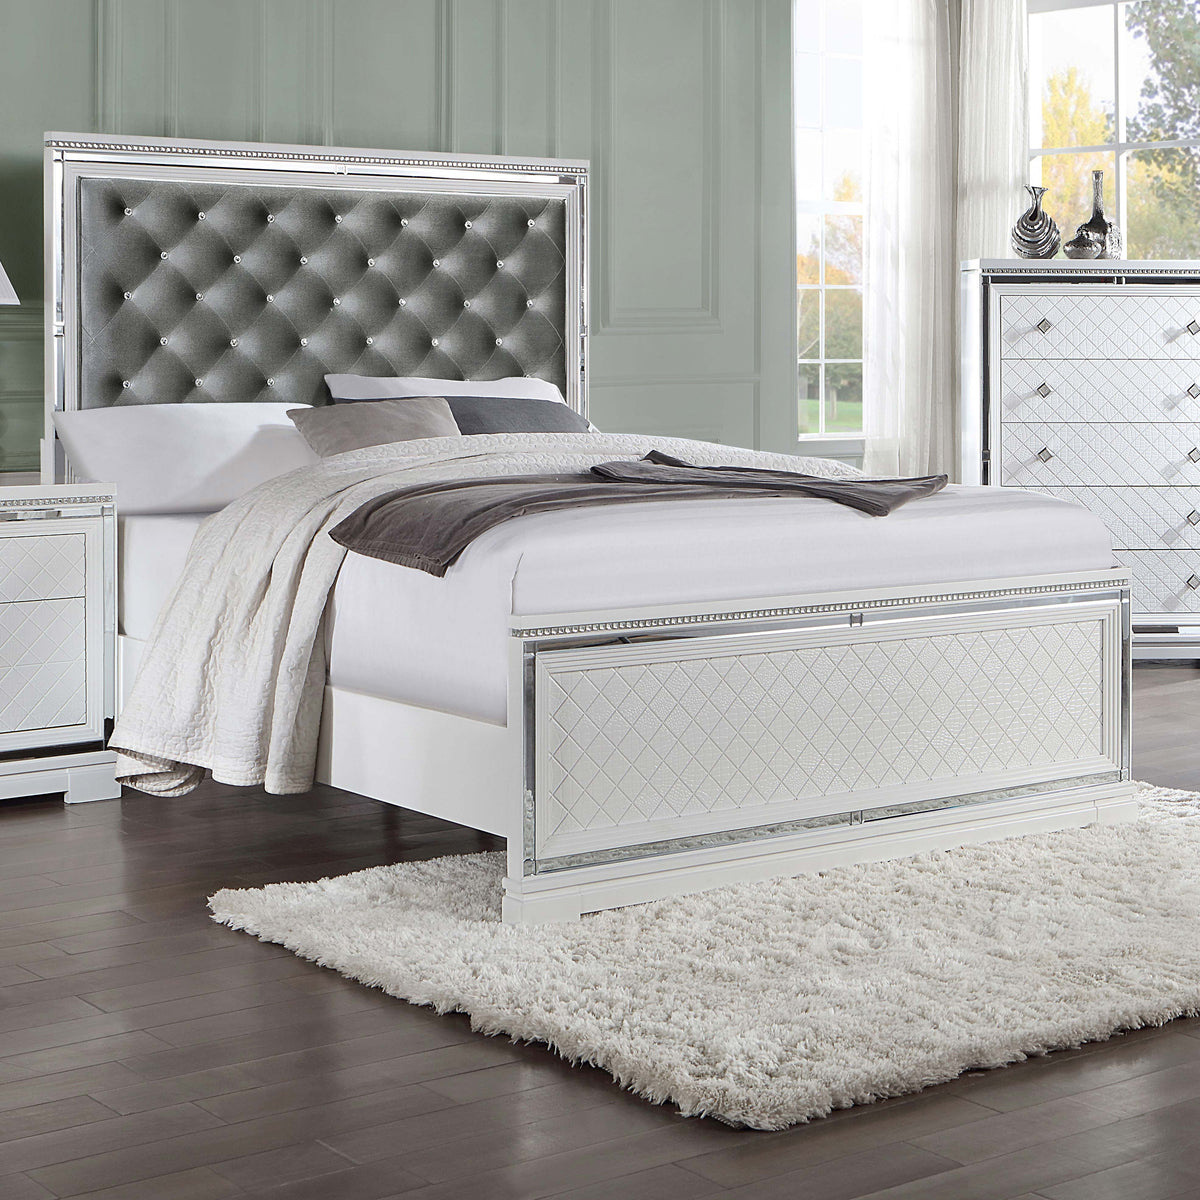 Eleanor Upholstered Tufted Bed White  Half Price Furniture